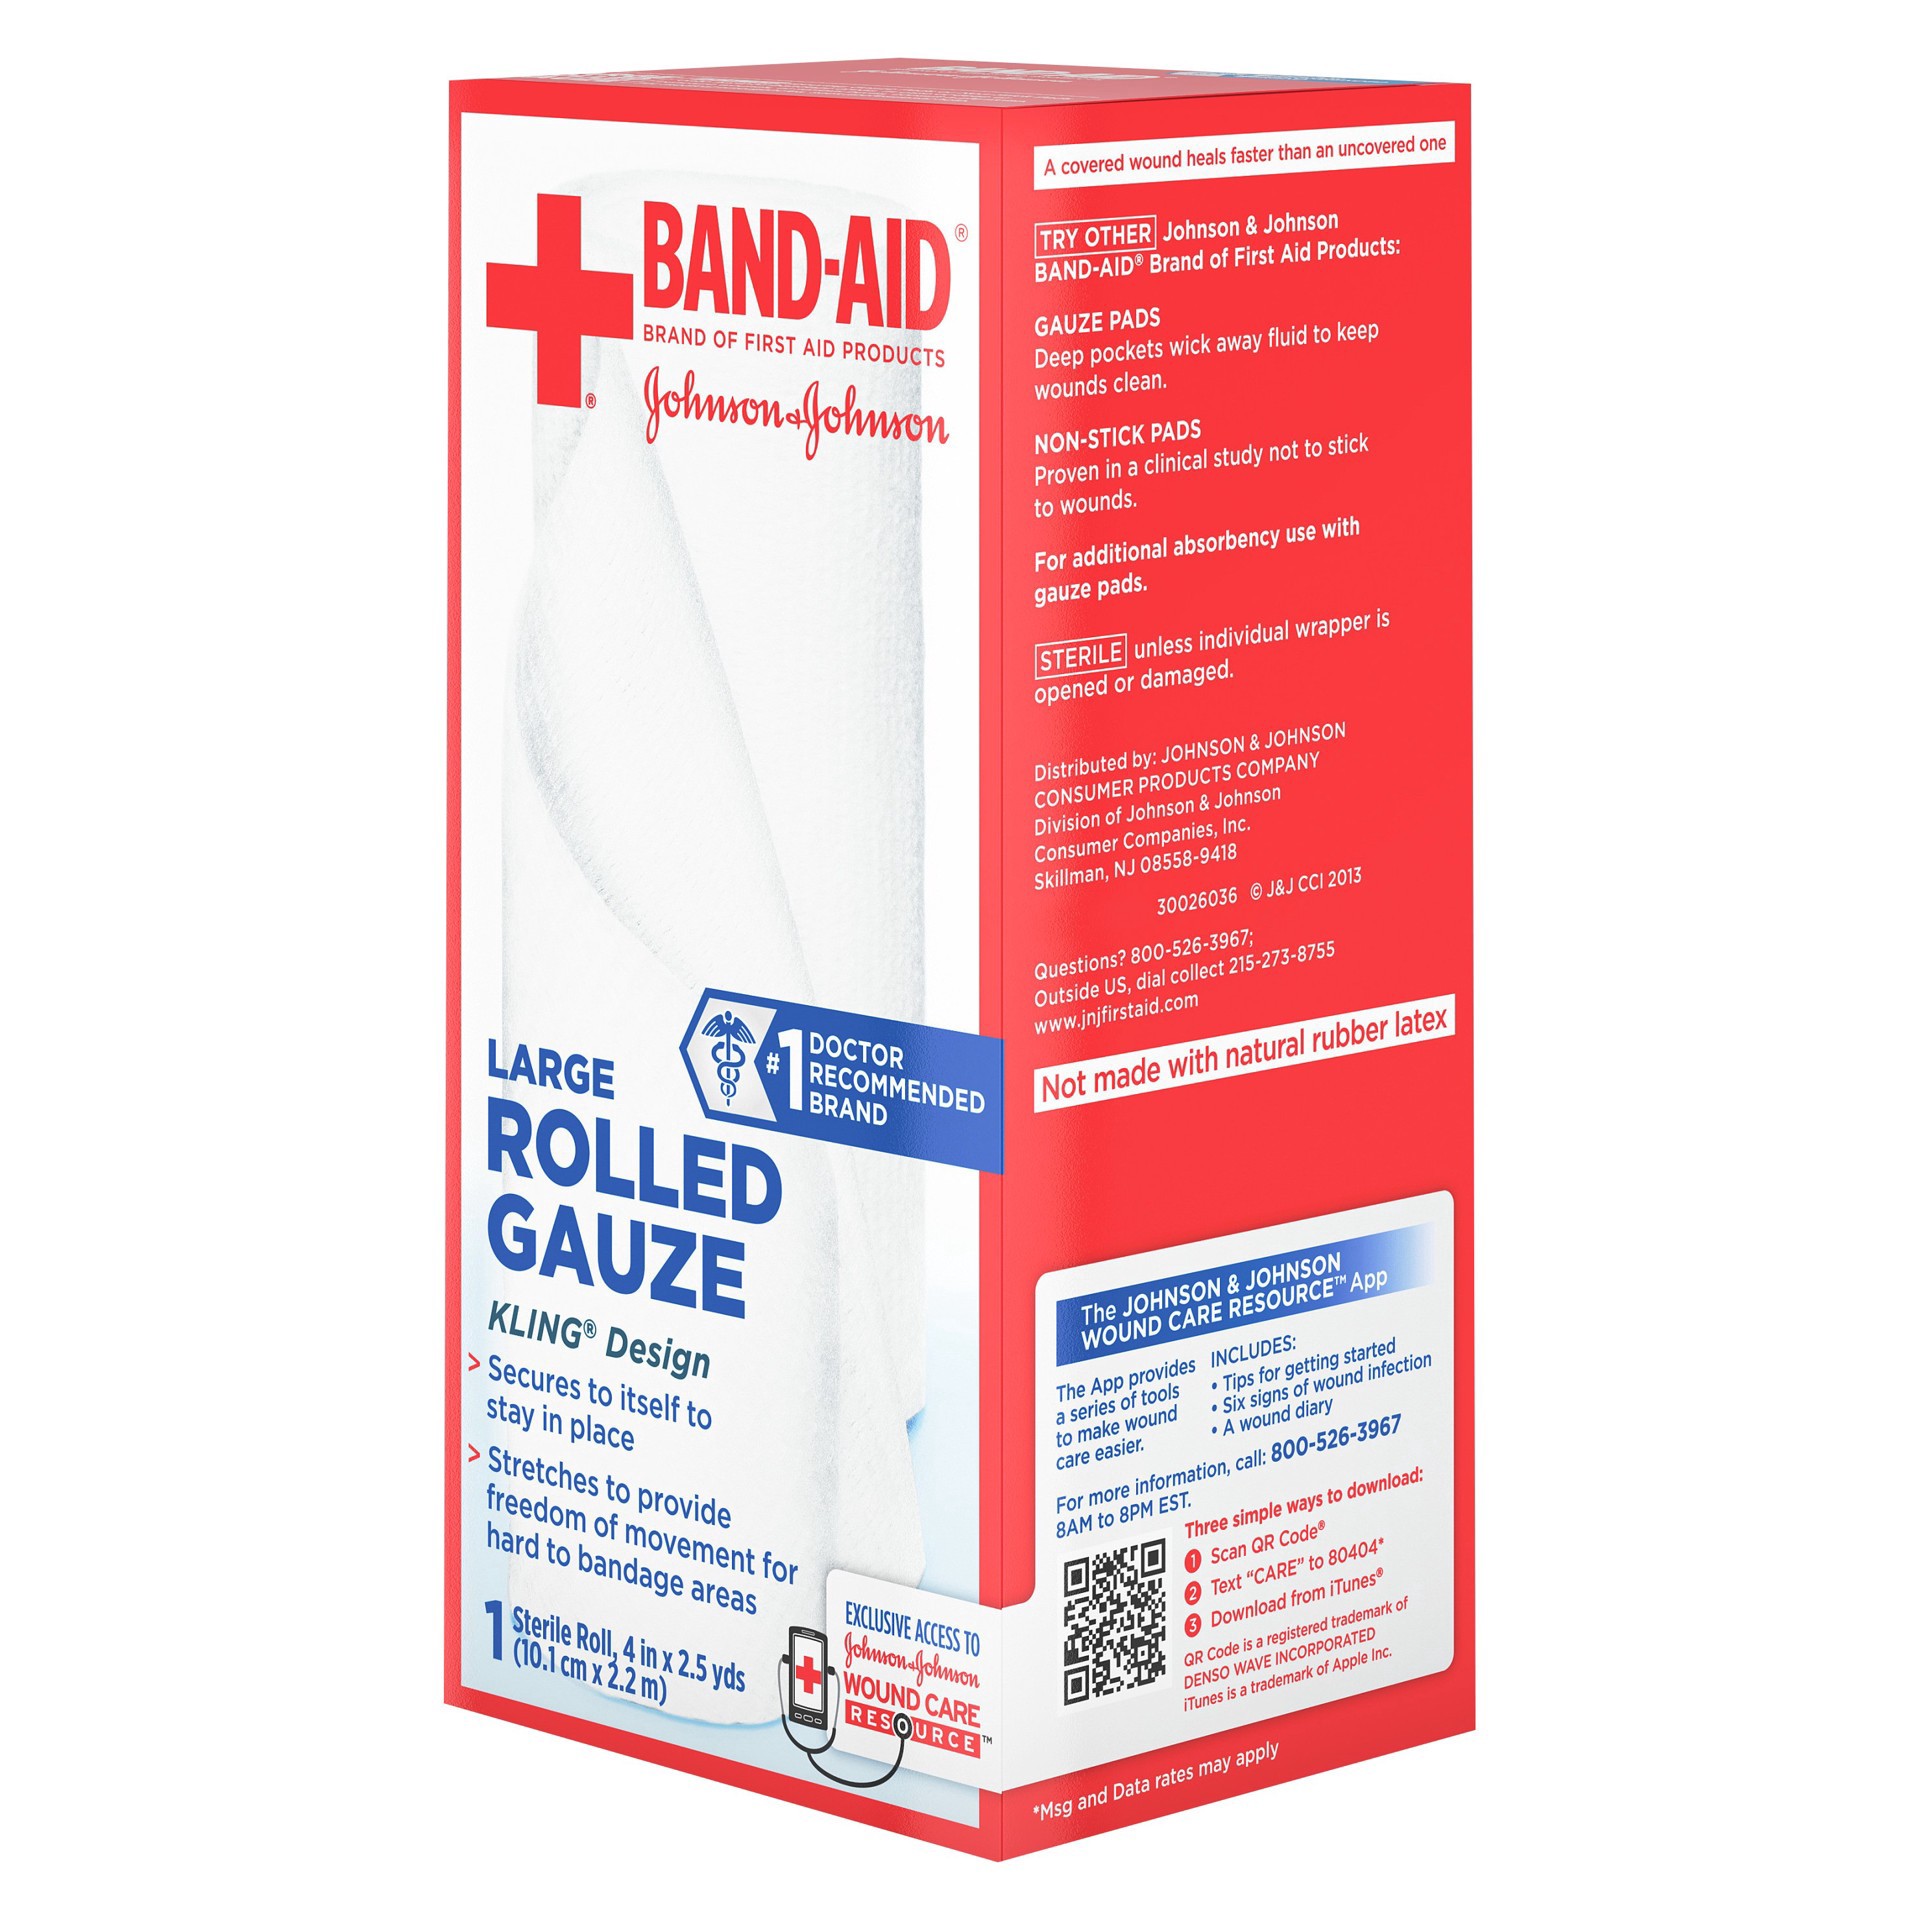 slide 14 of 15, BAND-AID Band Aid Brand of First Aid Products Flexible Rolled Gauze Dressing for Minor Wound Care, soft Padding and Instant Absorption, 4 Inches by 2.5 Yards, 1 ct